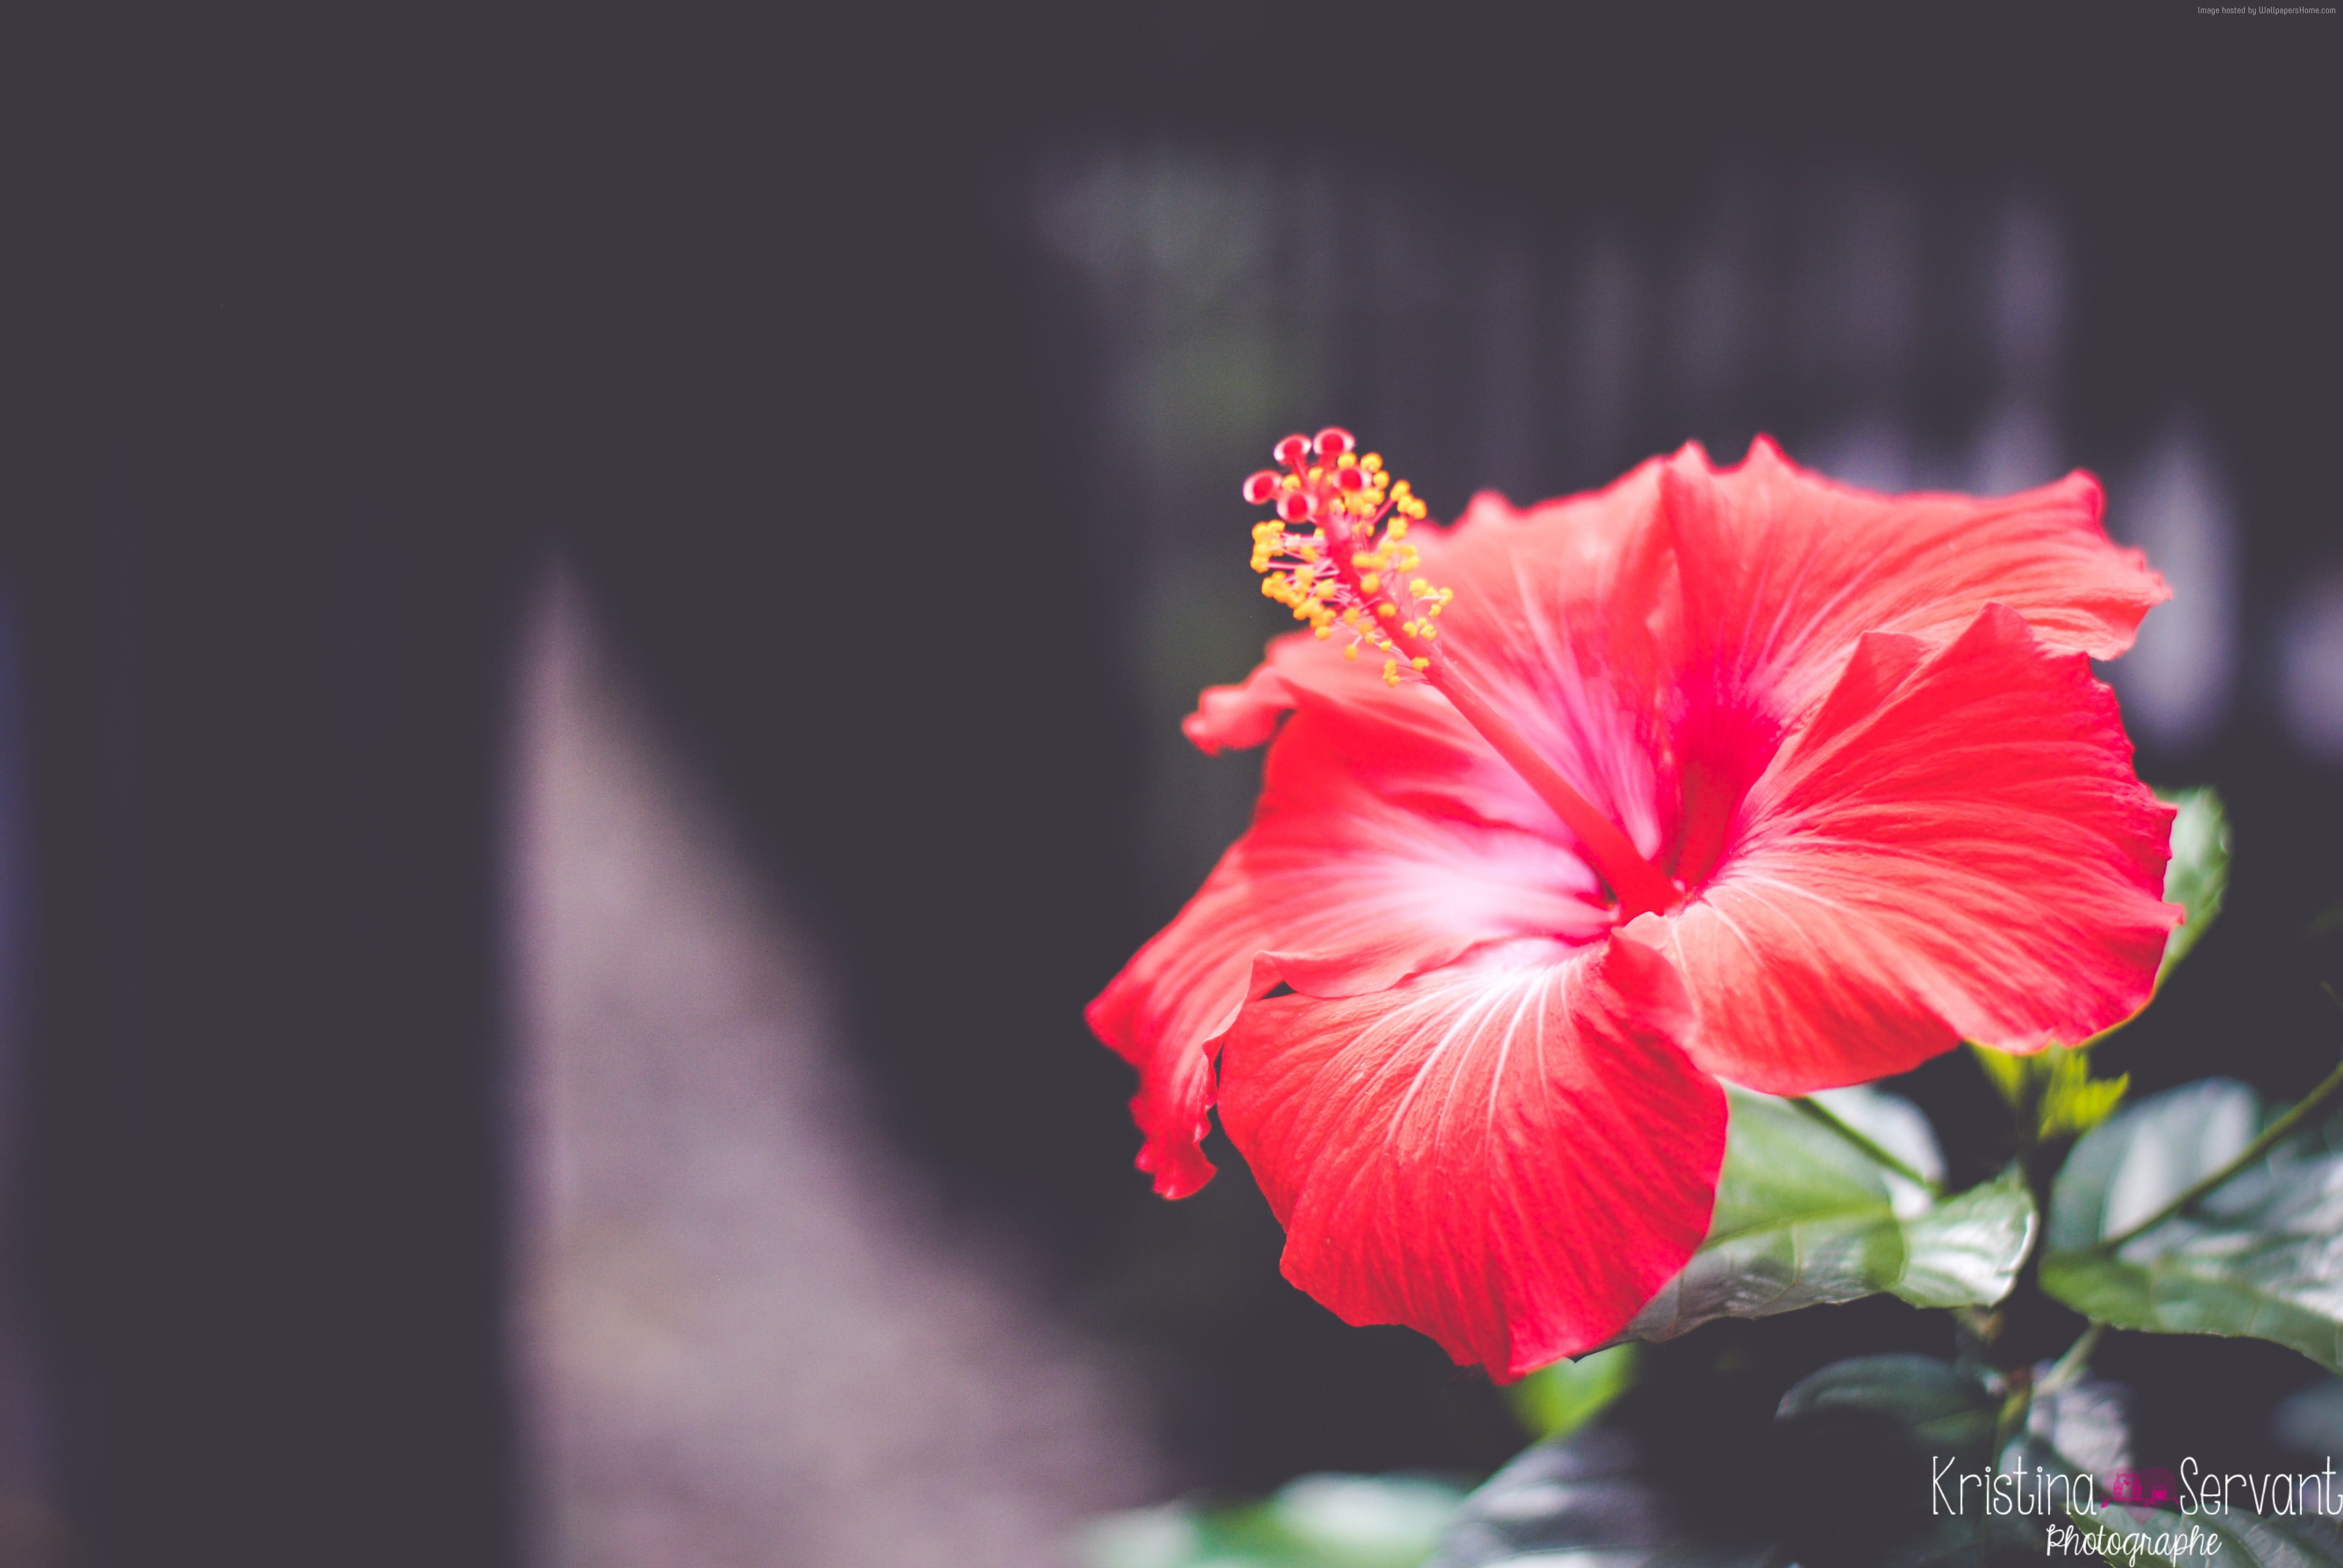 selective focus photography of red Hibiscus flower